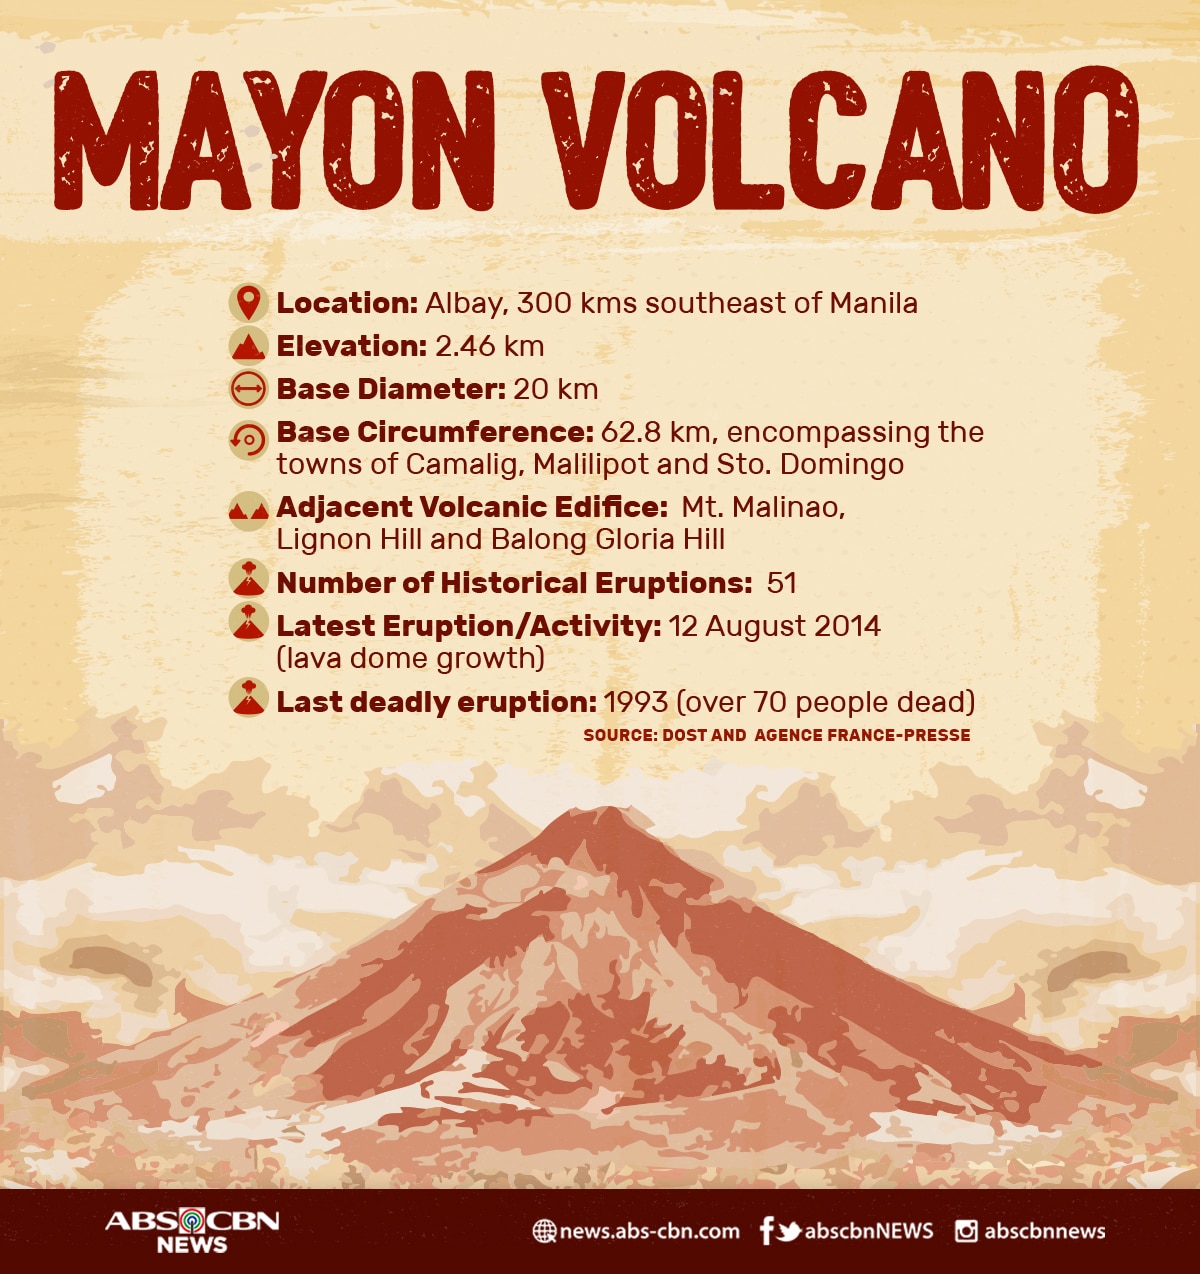 Quick facts: Mayon Volcano | ABS-CBN News